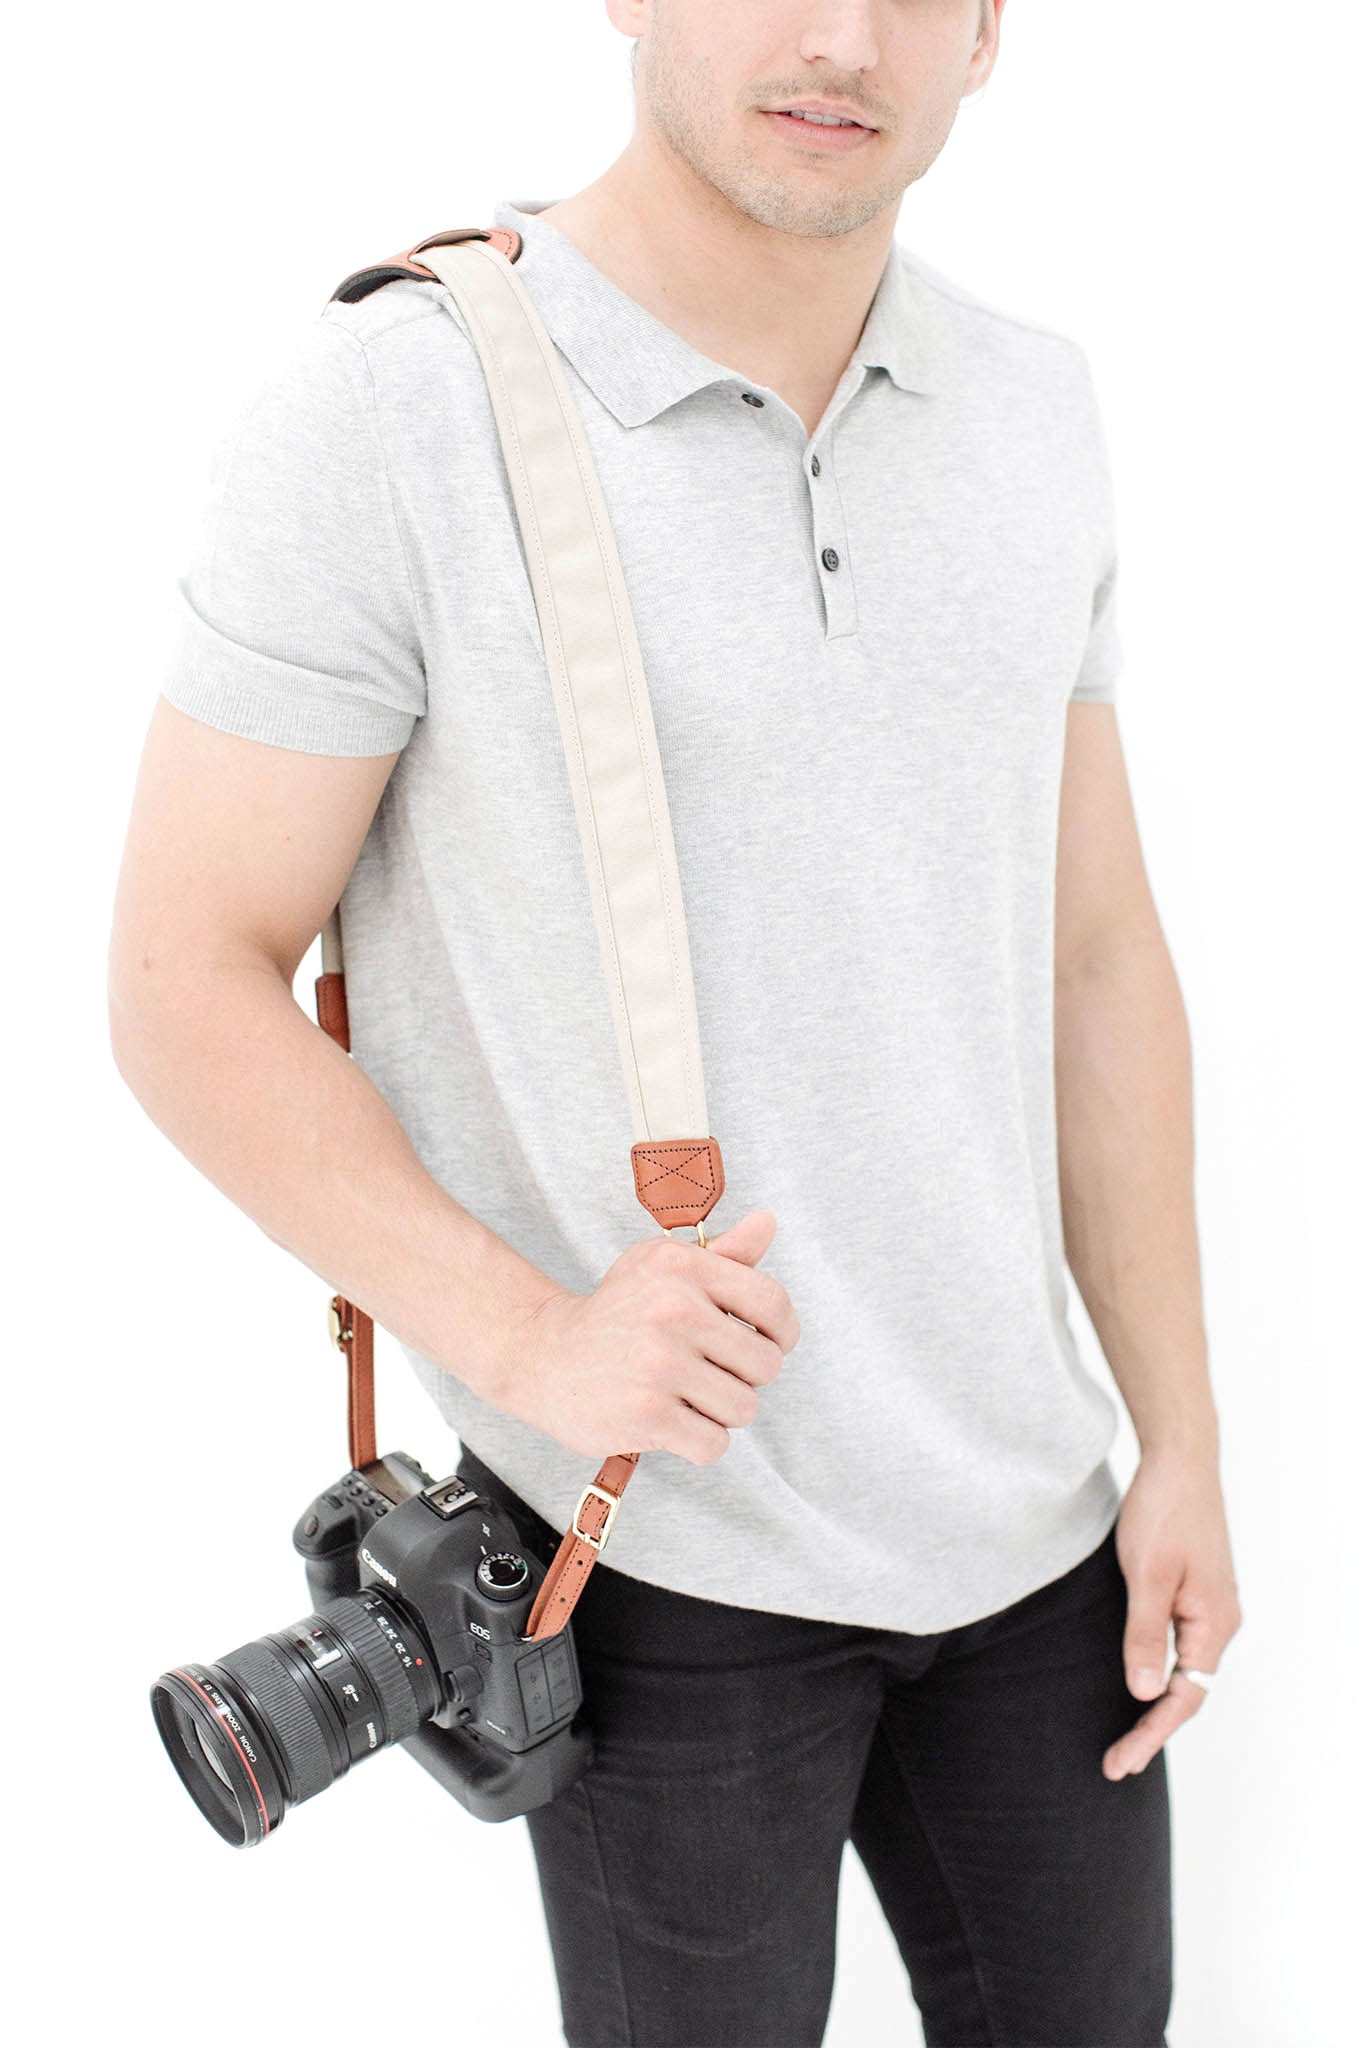 FOTO | Stone Fotostrap - a khaki canvas and genuine leather camera strap that can be personalized with a monogram or business logo, making it the perfect personalized gift! 